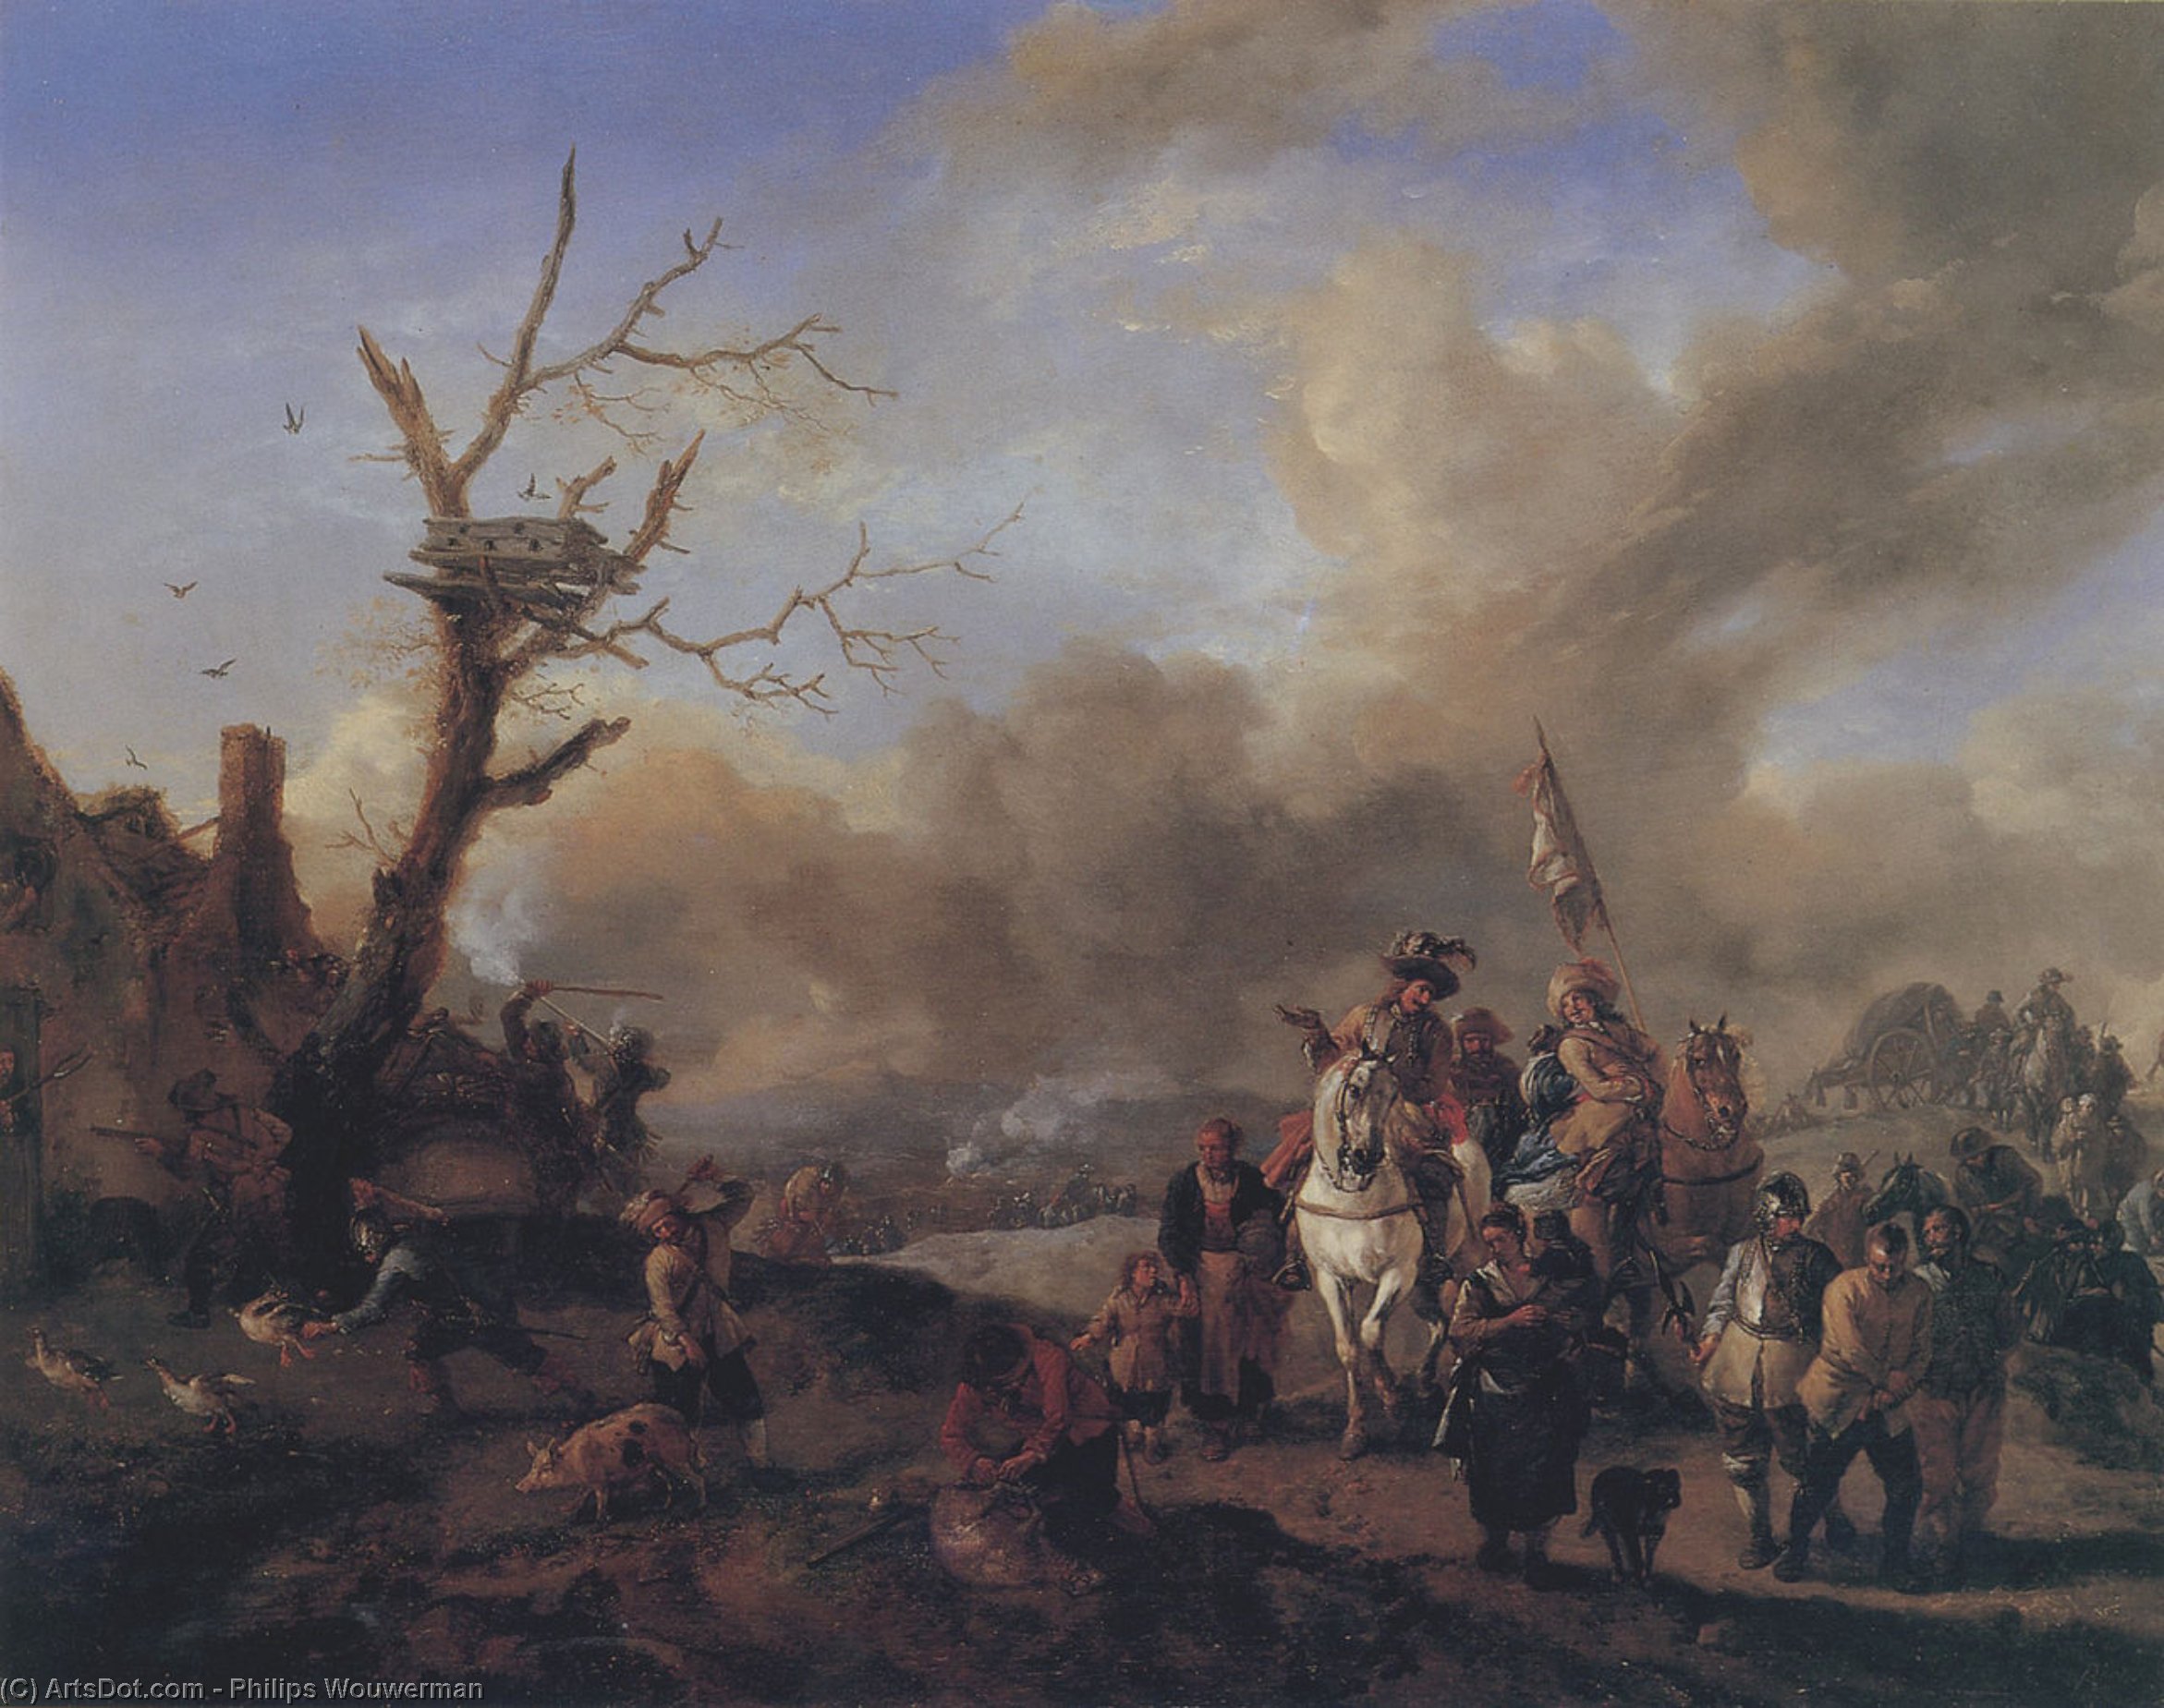 WikiOO.org - Enciclopédia das Belas Artes - Pintura, Arte por Philips Wouwerman - The soldiers squad with sutlers and children